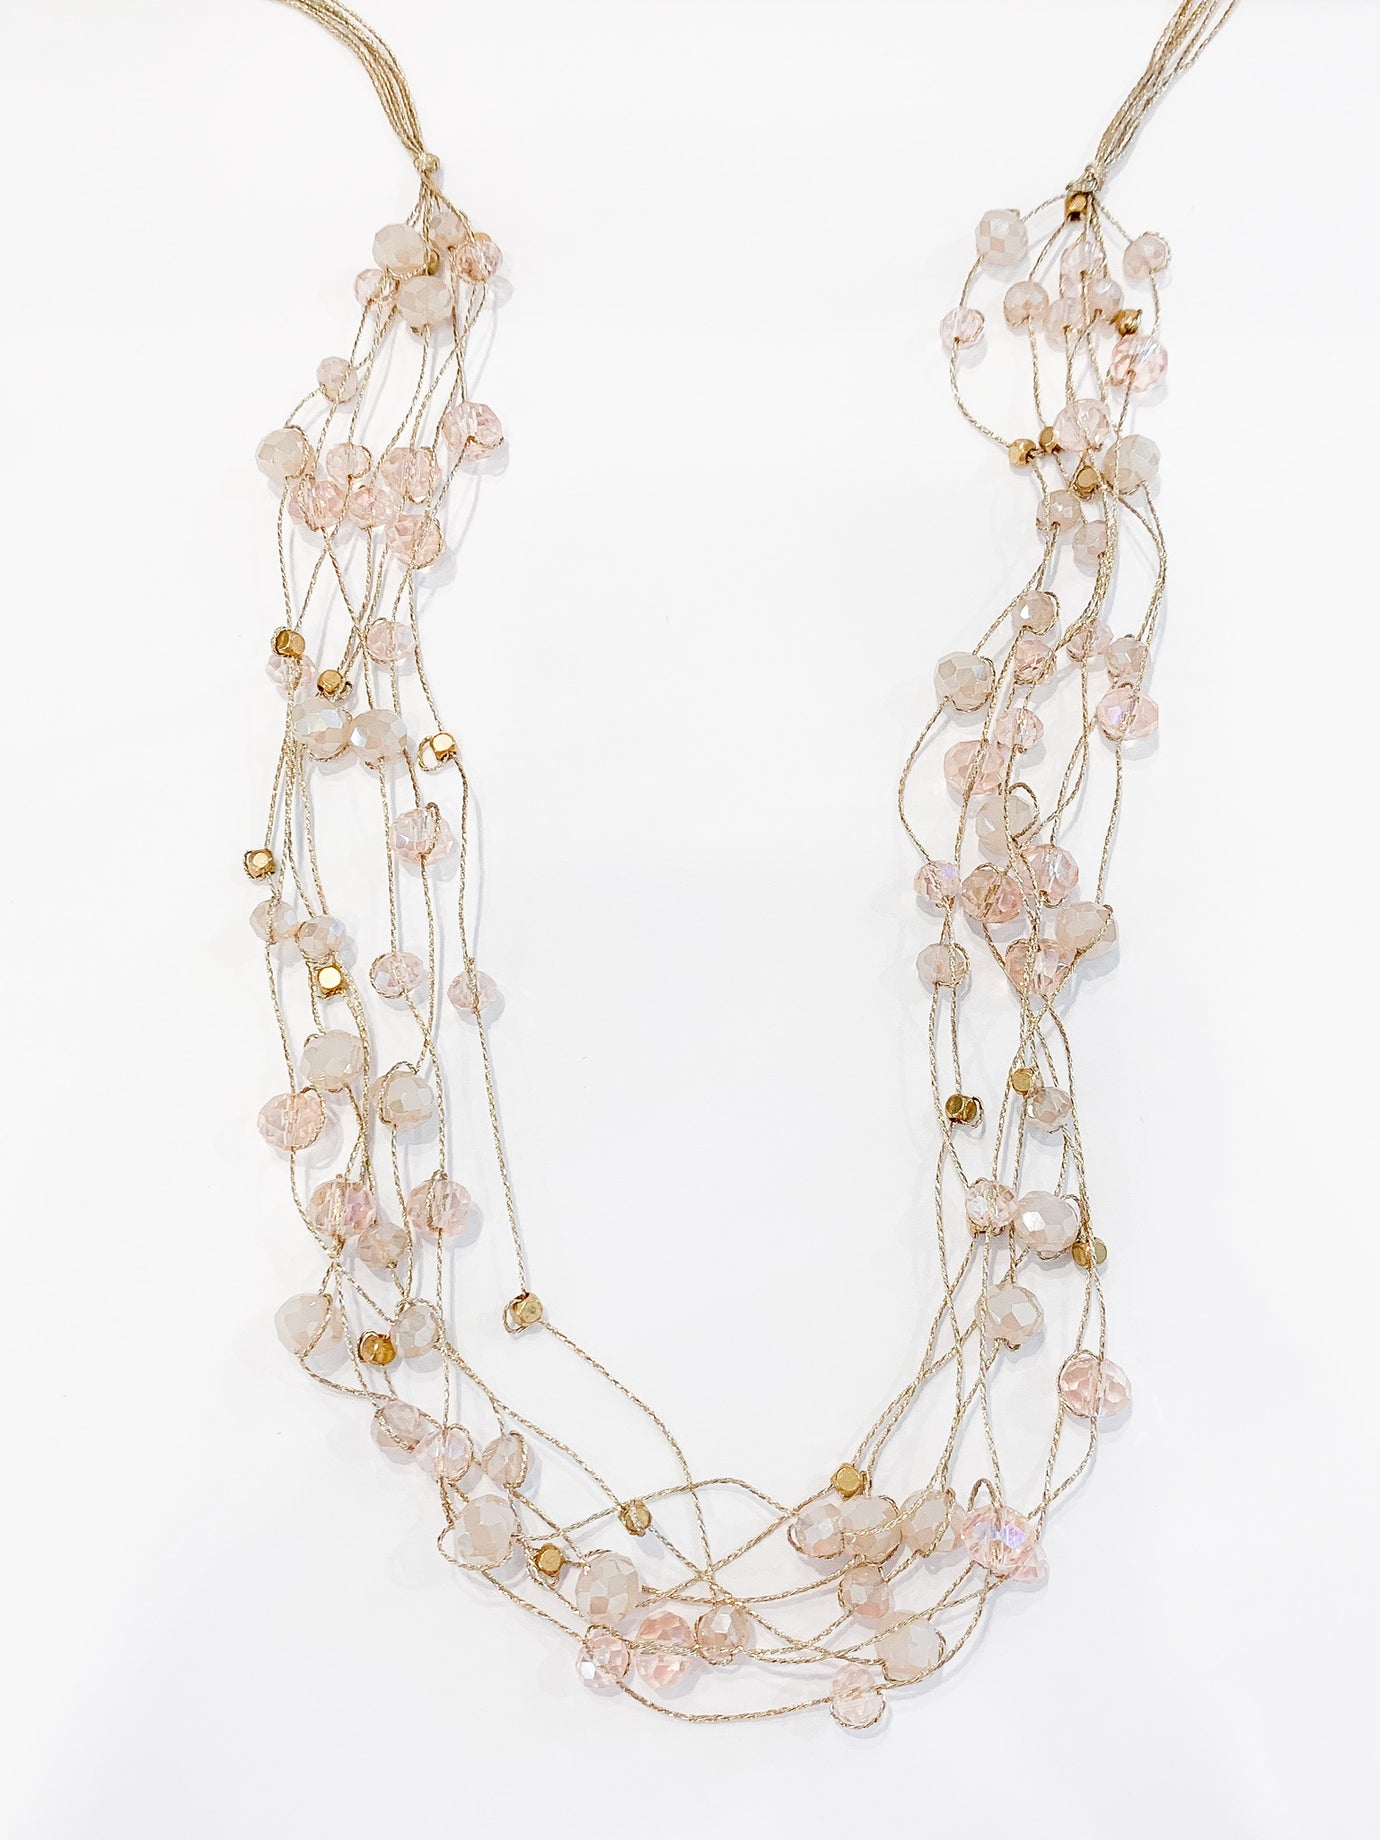 Stella beaded necklace in blush. Multiple strands of scattered beads